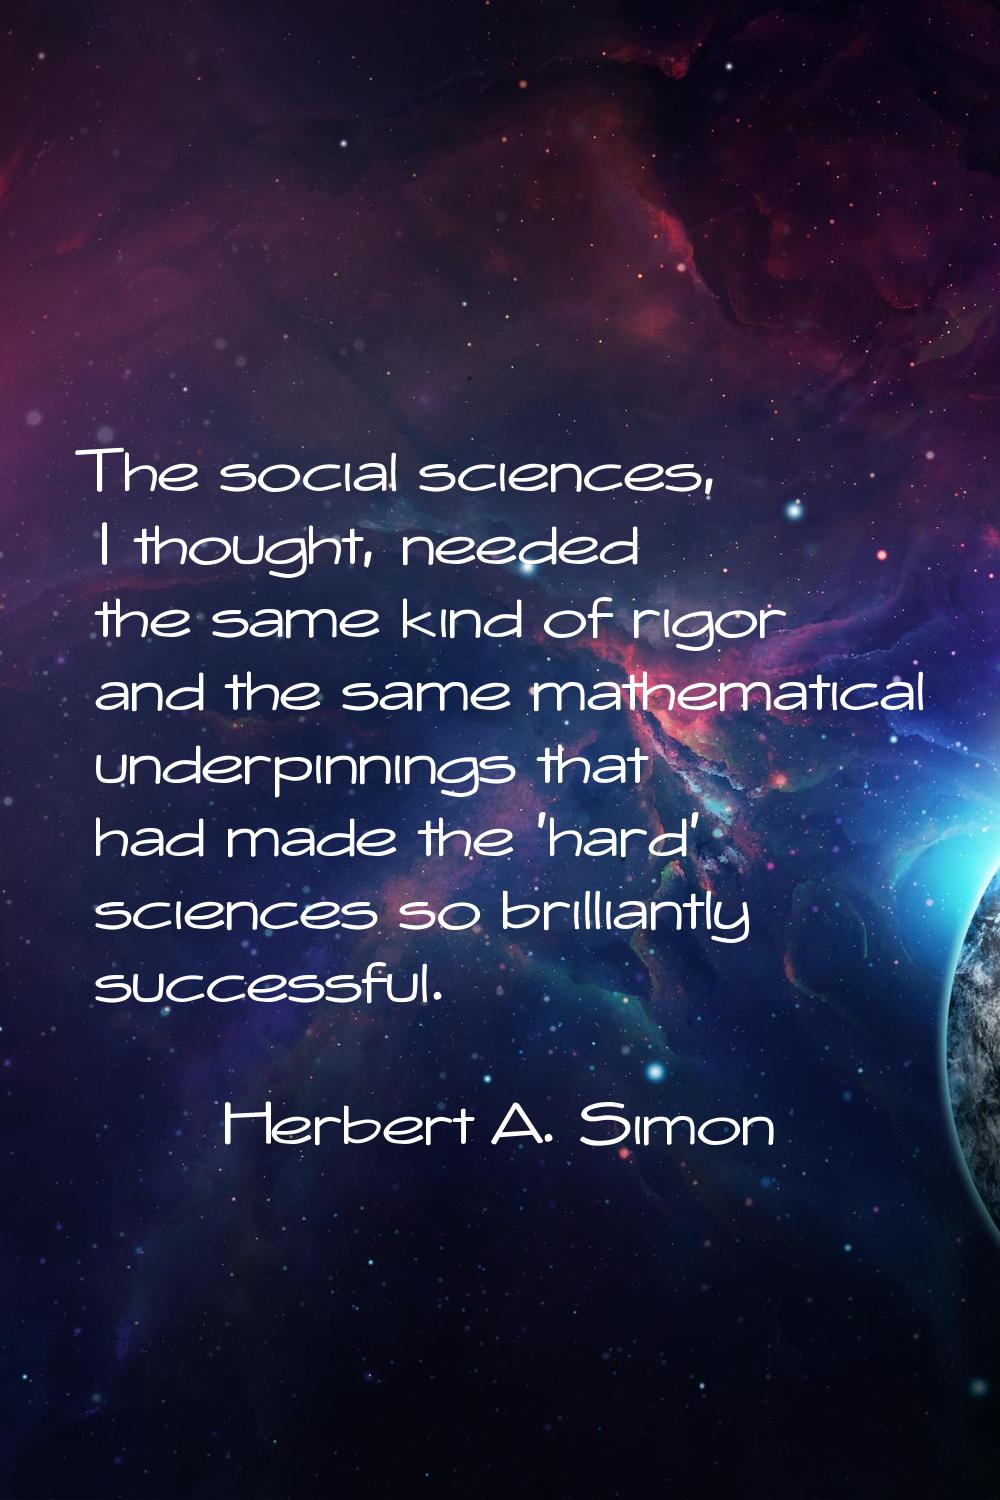 The social sciences, I thought, needed the same kind of rigor and the same mathematical underpinnin